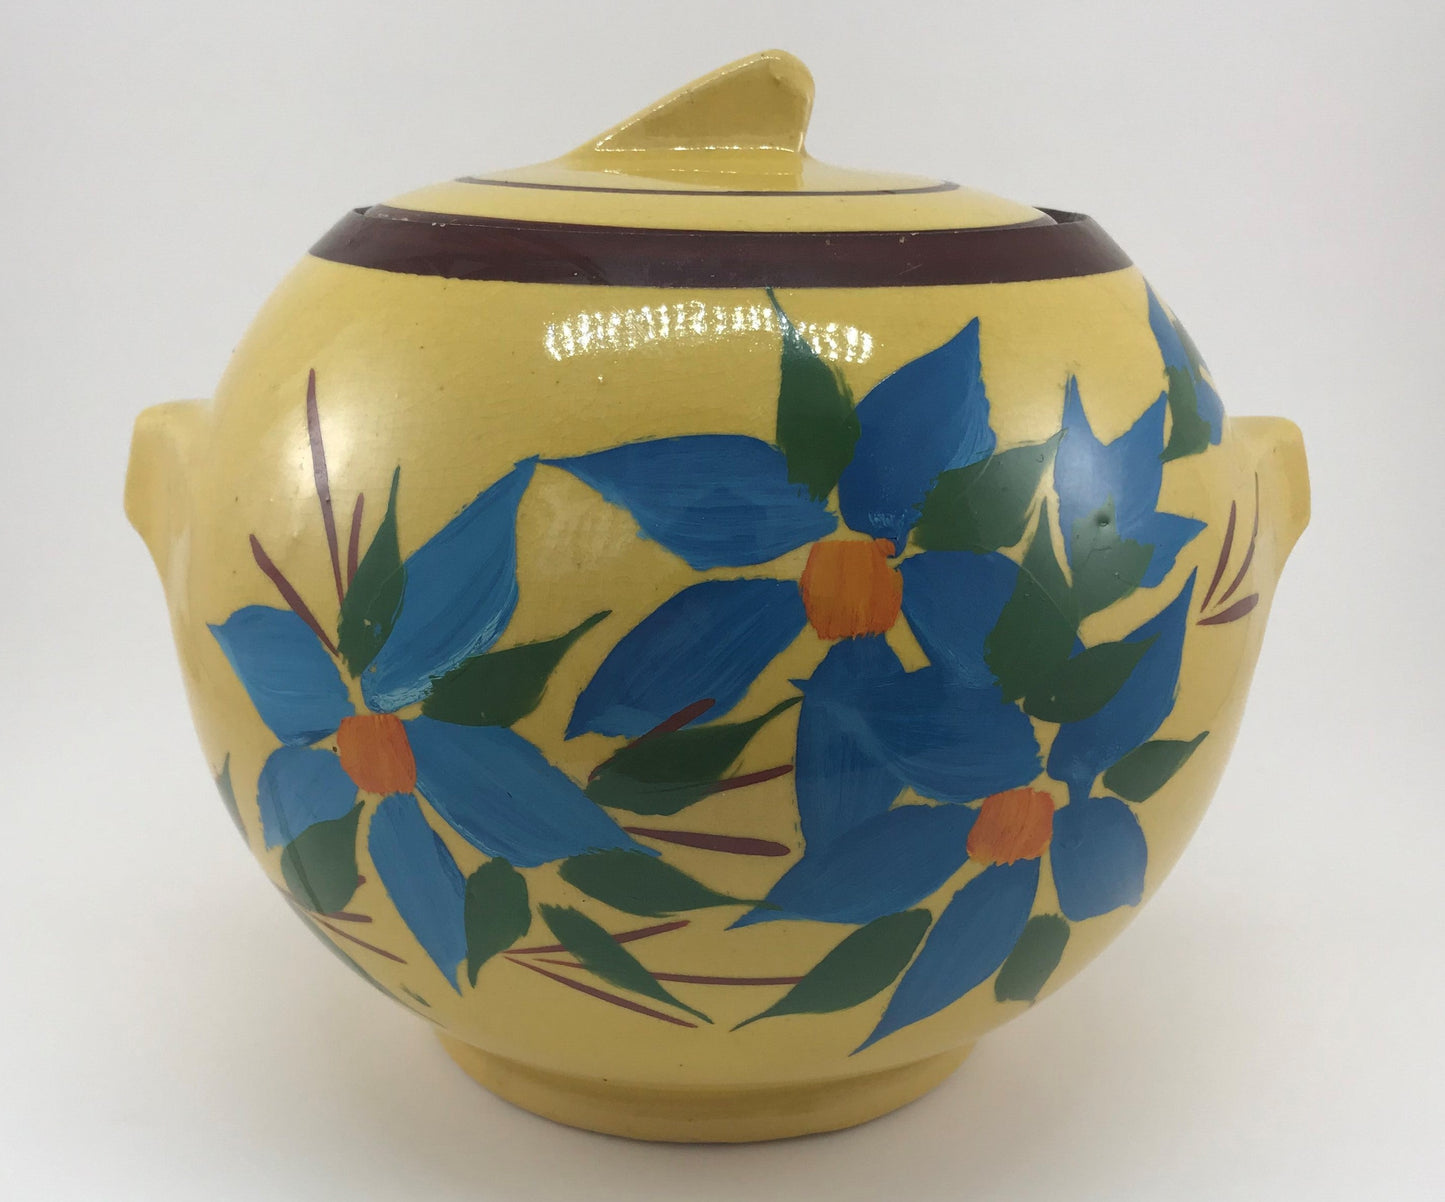 McCoy Cookie Jar, Yellow with Hand-painted Blue Flowers, c. 1939